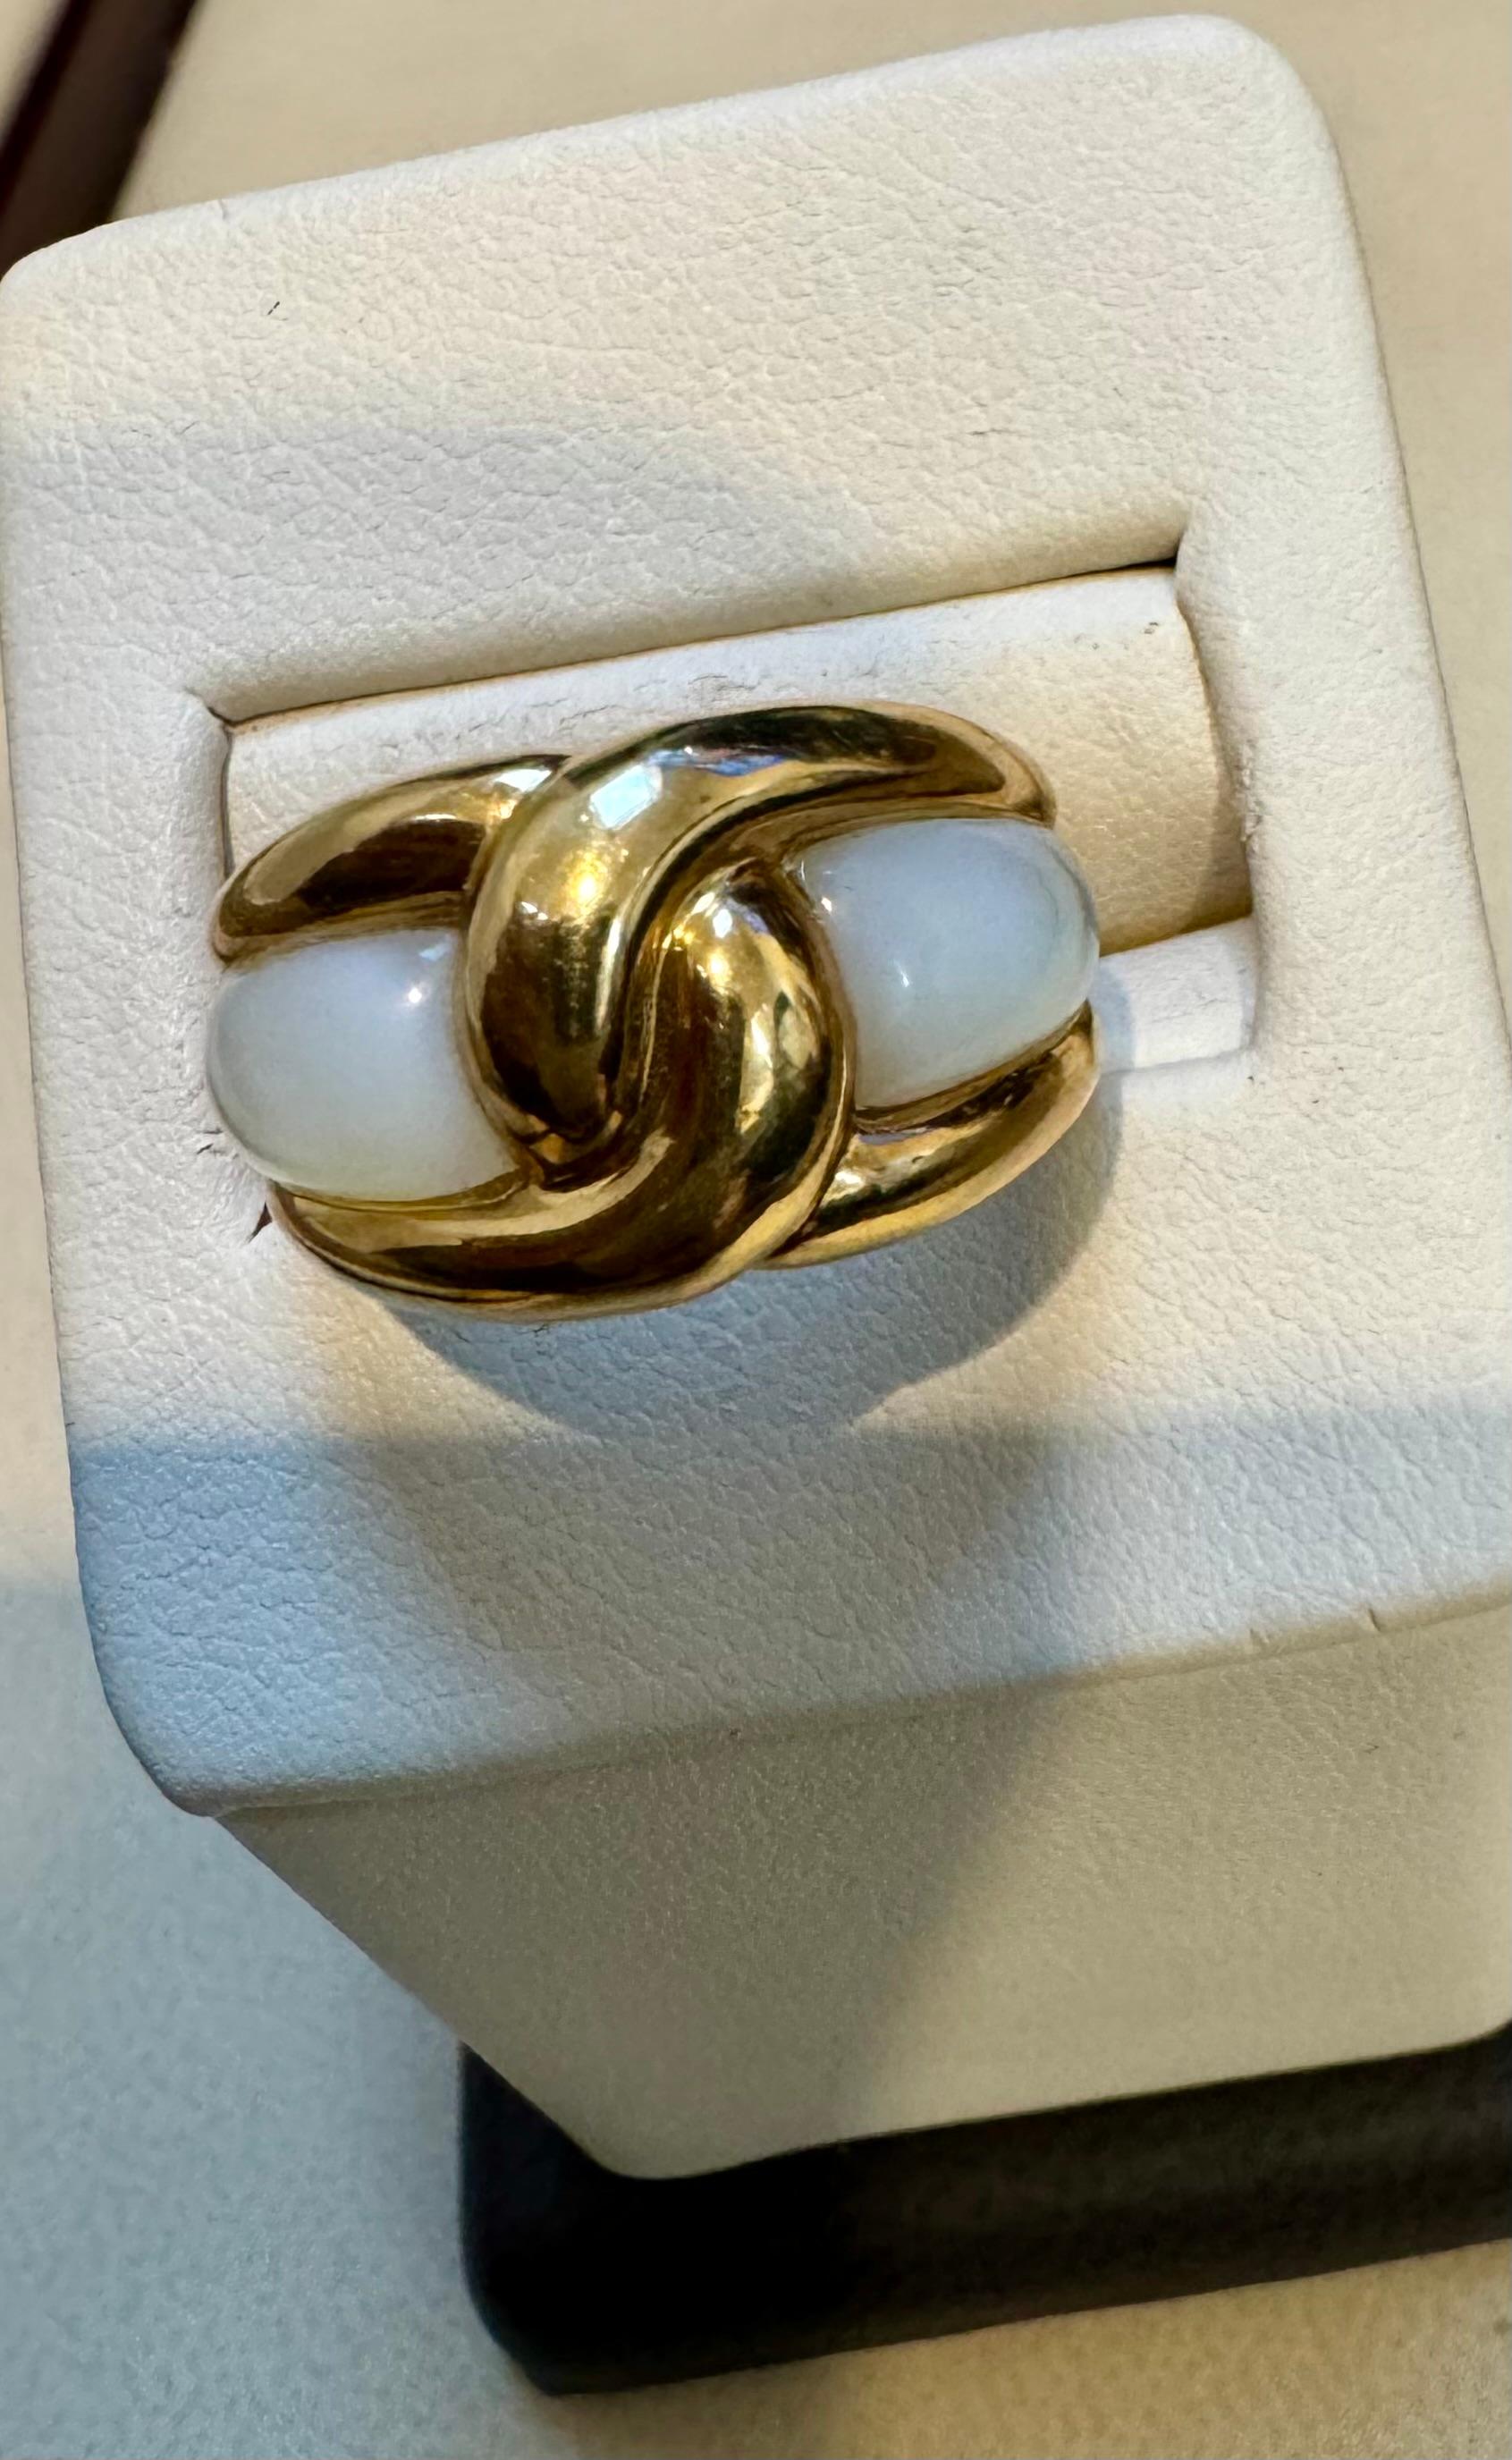 Van Cleef & Arpels Contemporary Mother of pearl “Twisted” Ring 18KY Gold Size5.5 For Sale 1